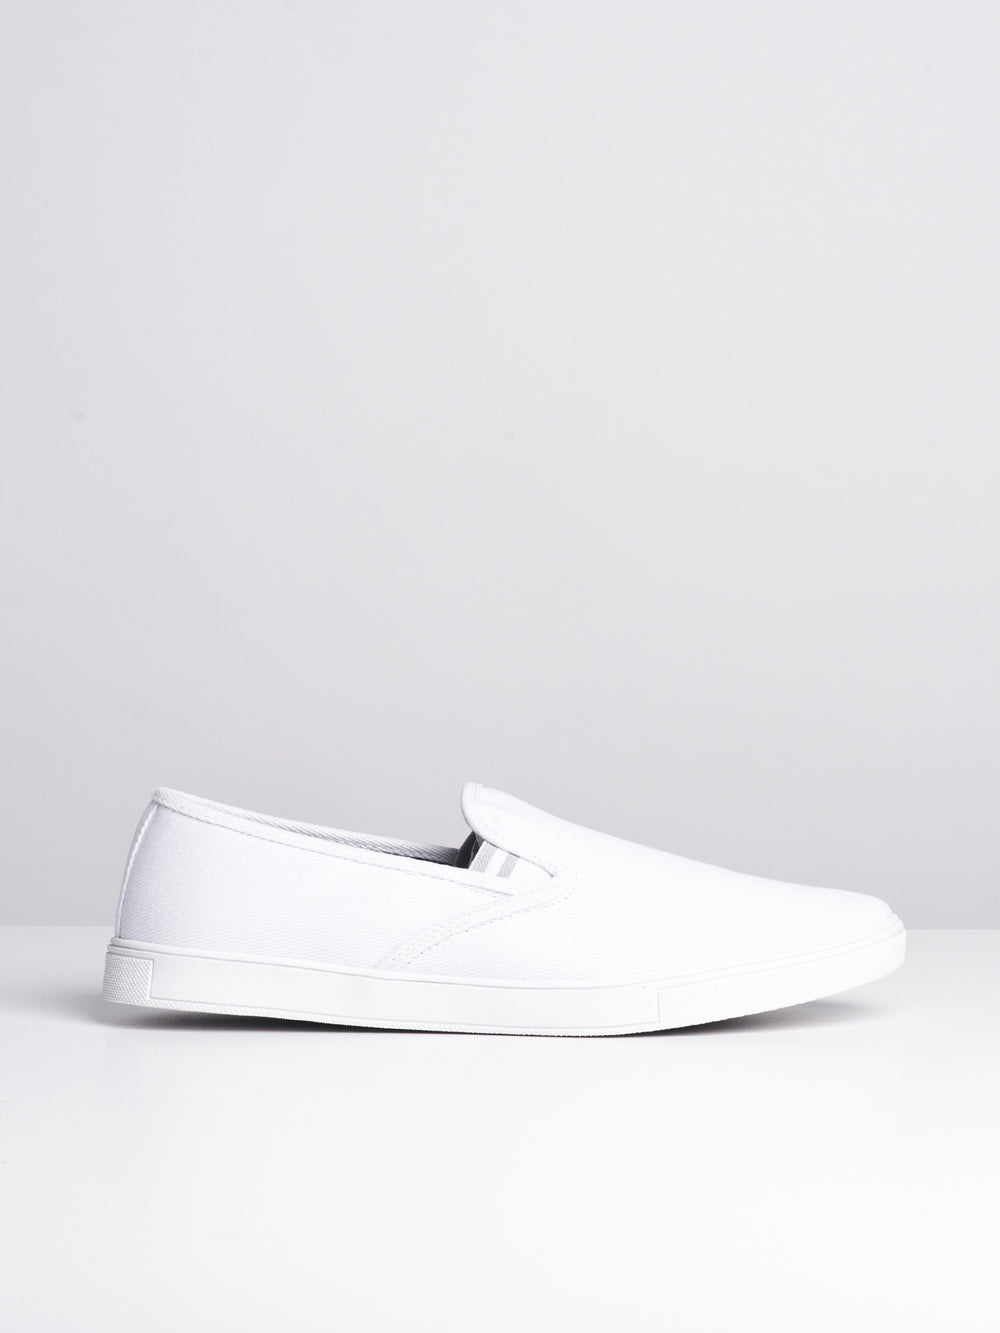 MENS CHASE - WHITE-D2 - CLEARANCE